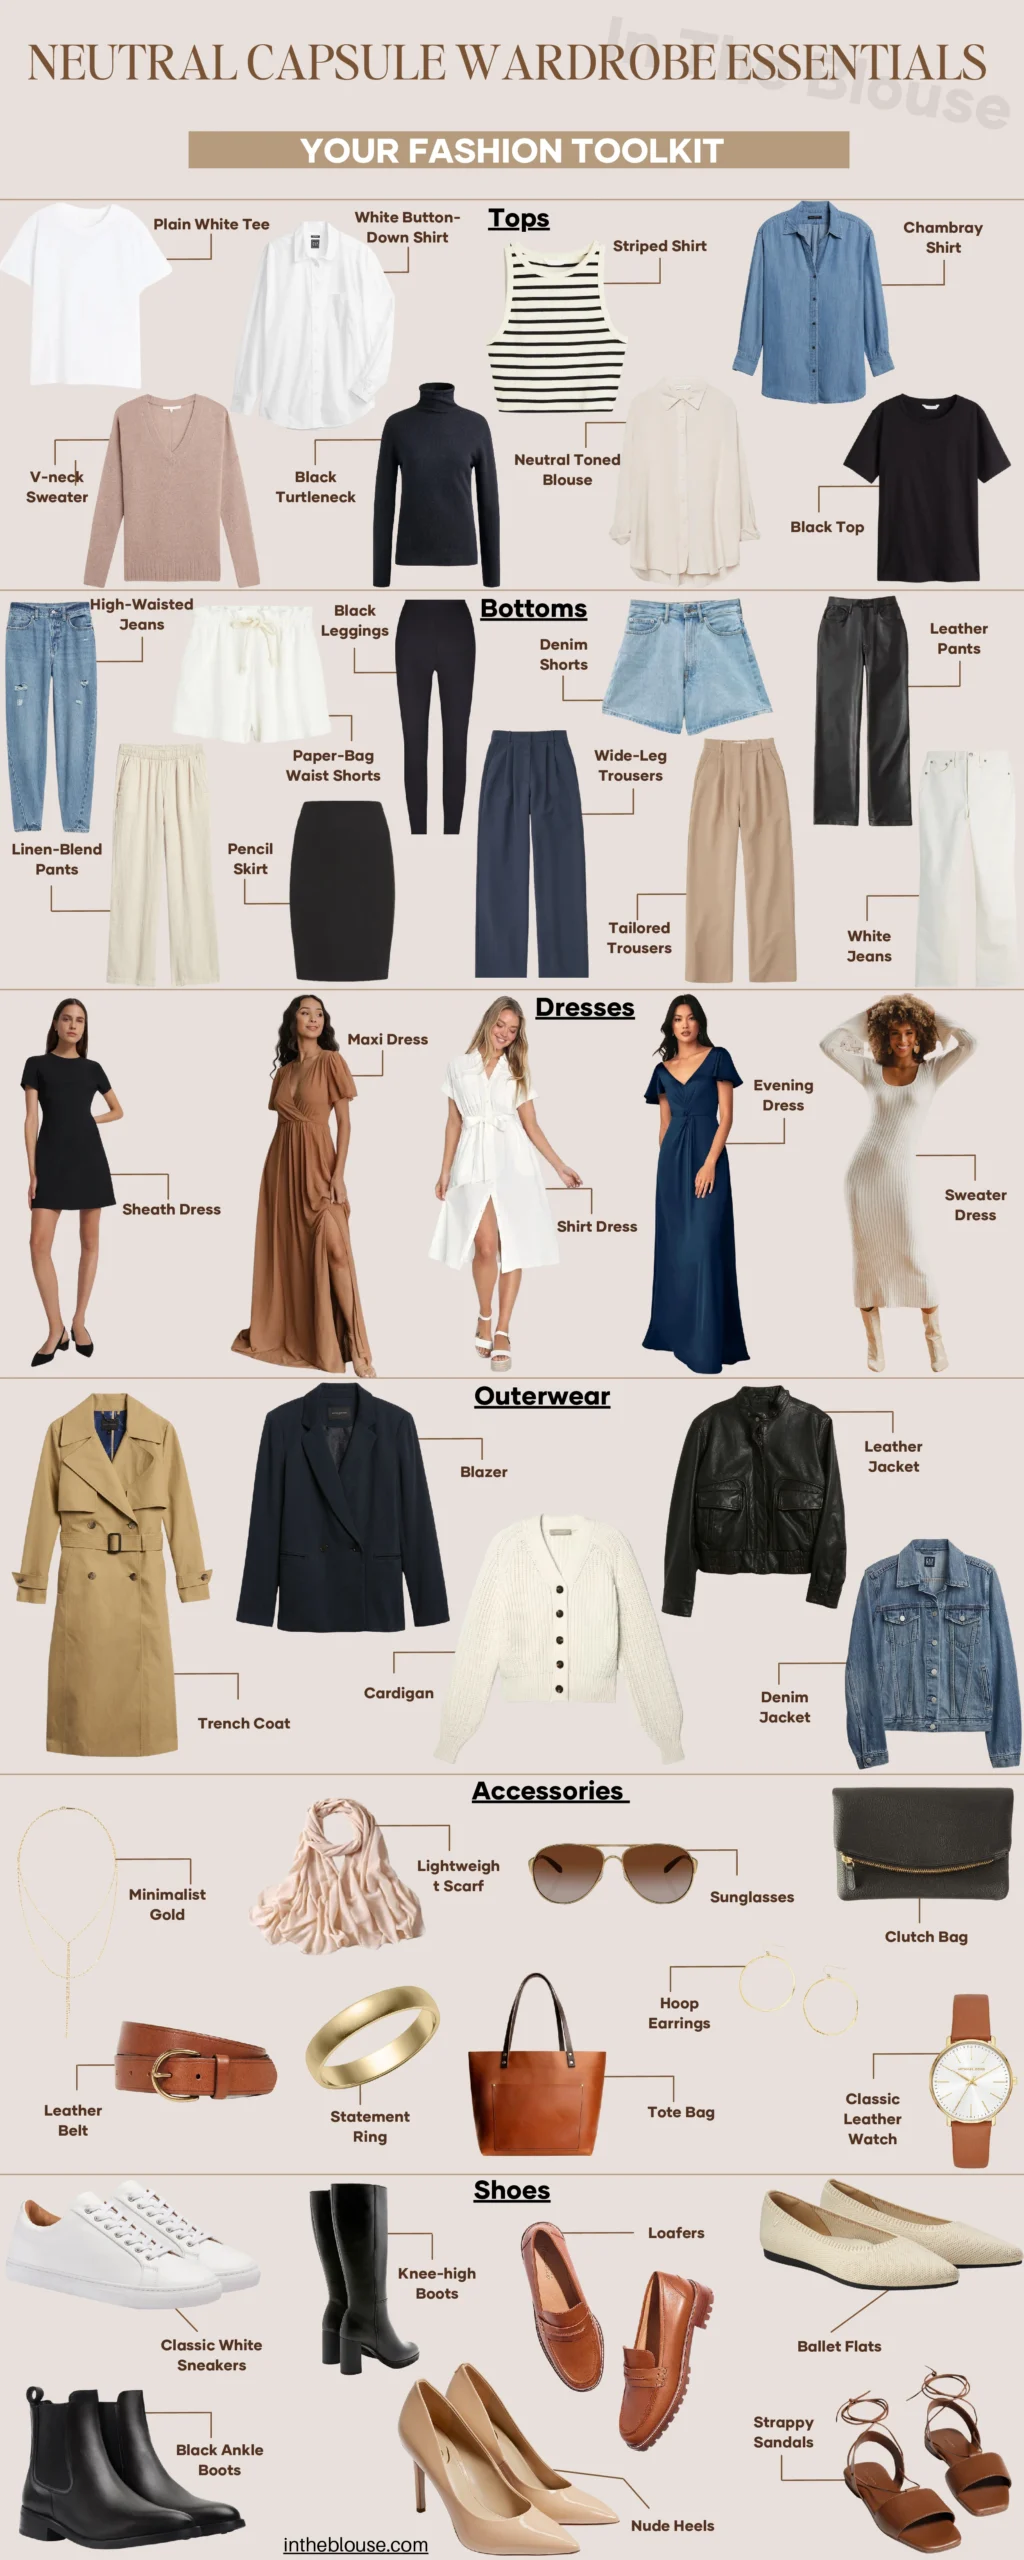 https://intheblouse.elementor.cloud/wp-content/uploads/2023/06/int-he-blouse-neutral-wardrobe-essentials-infographic-1-scaled.webp